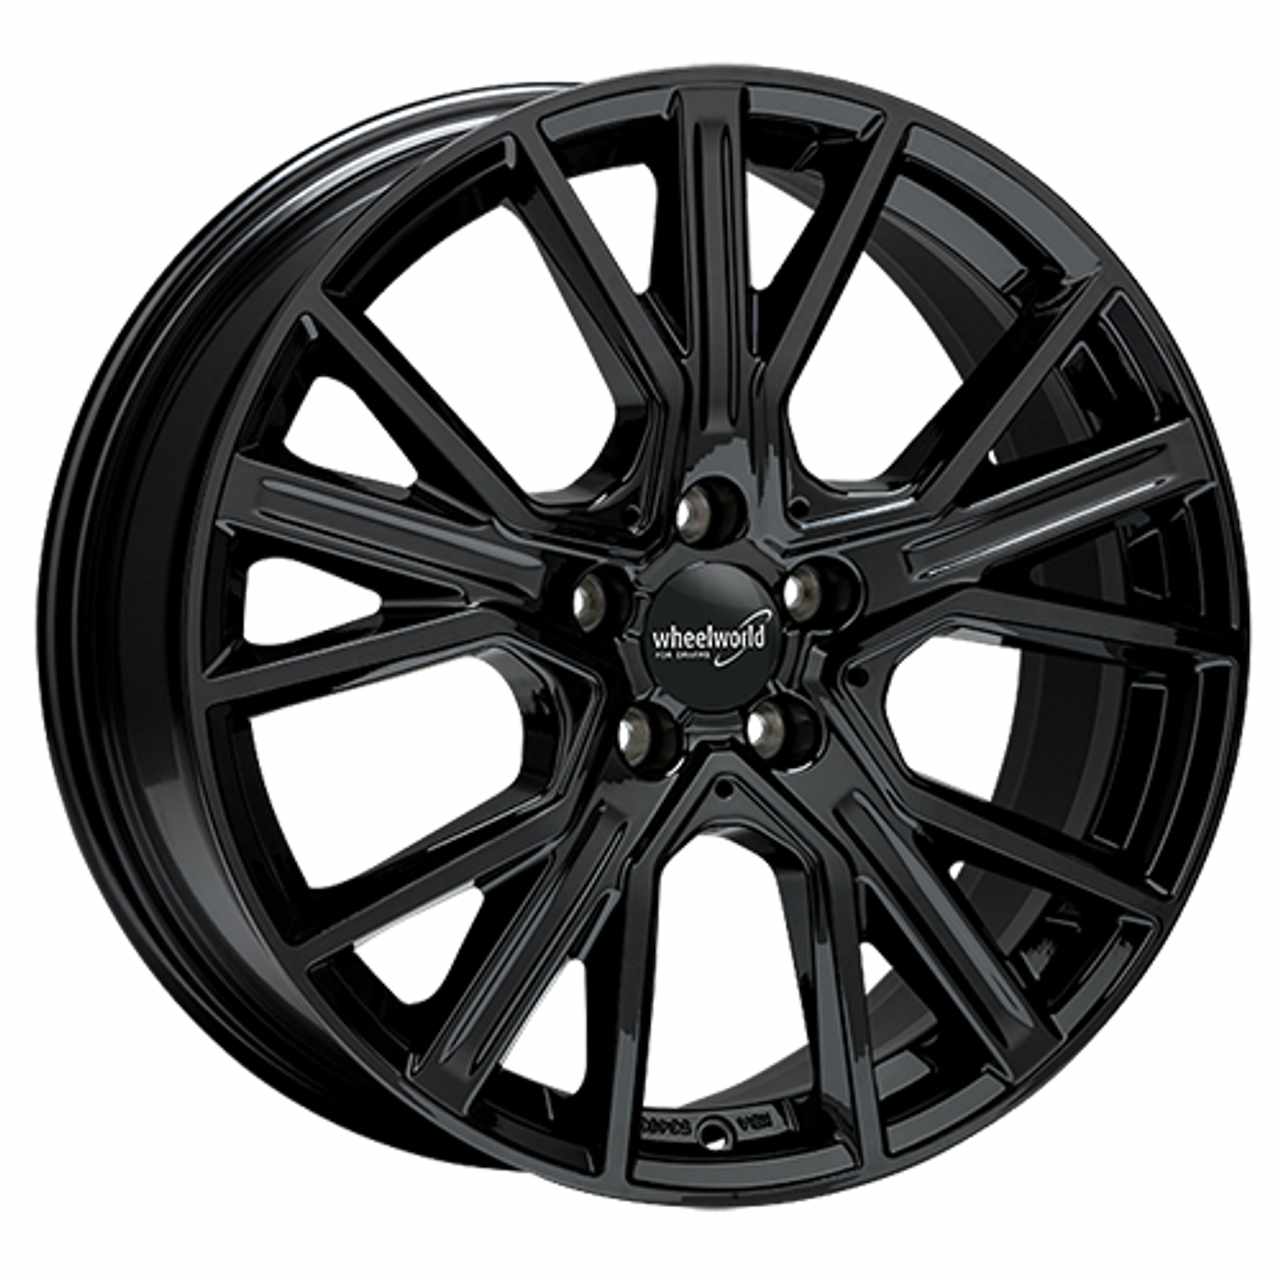 WHEELWORLD-2DRV WH34 black glossy painted 7.5Jx17 5x112 ET45